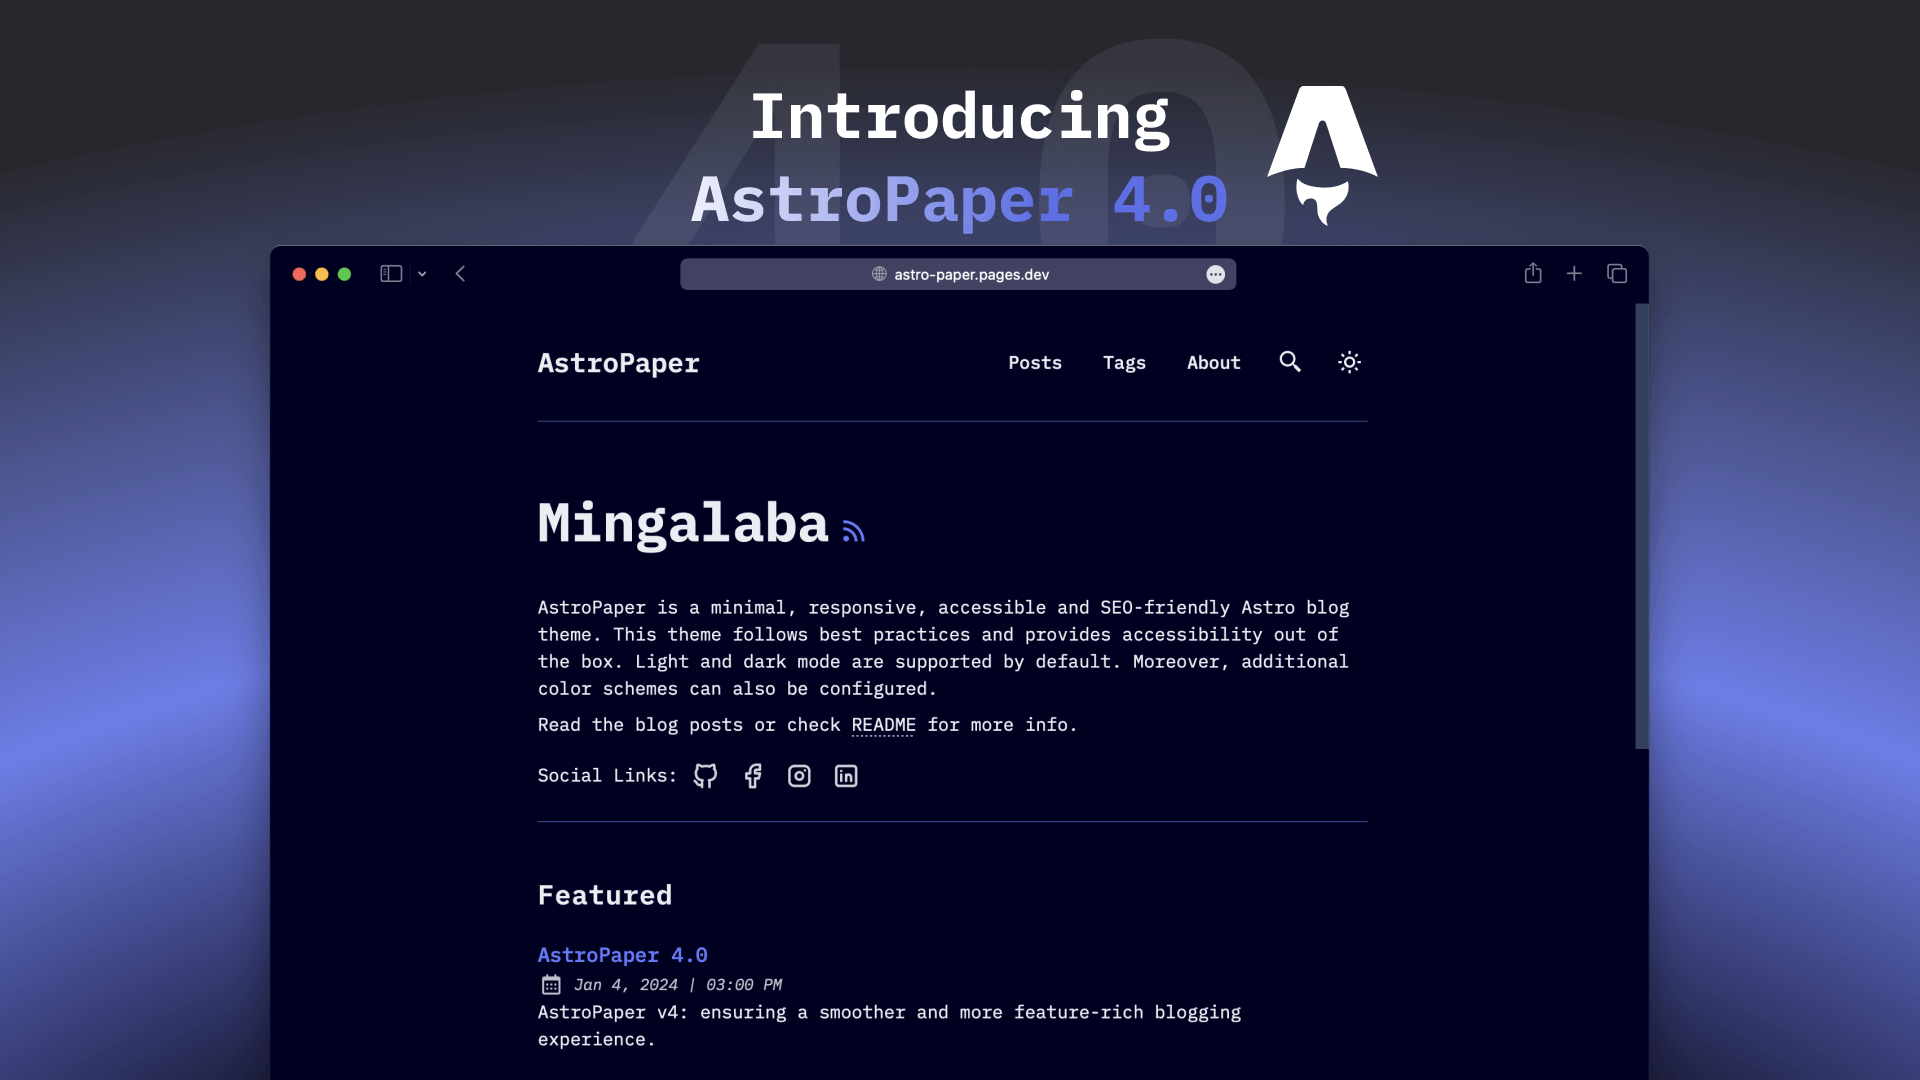 AstroPaper v4: ensuring a smoother and more feature-rich blogging experience.